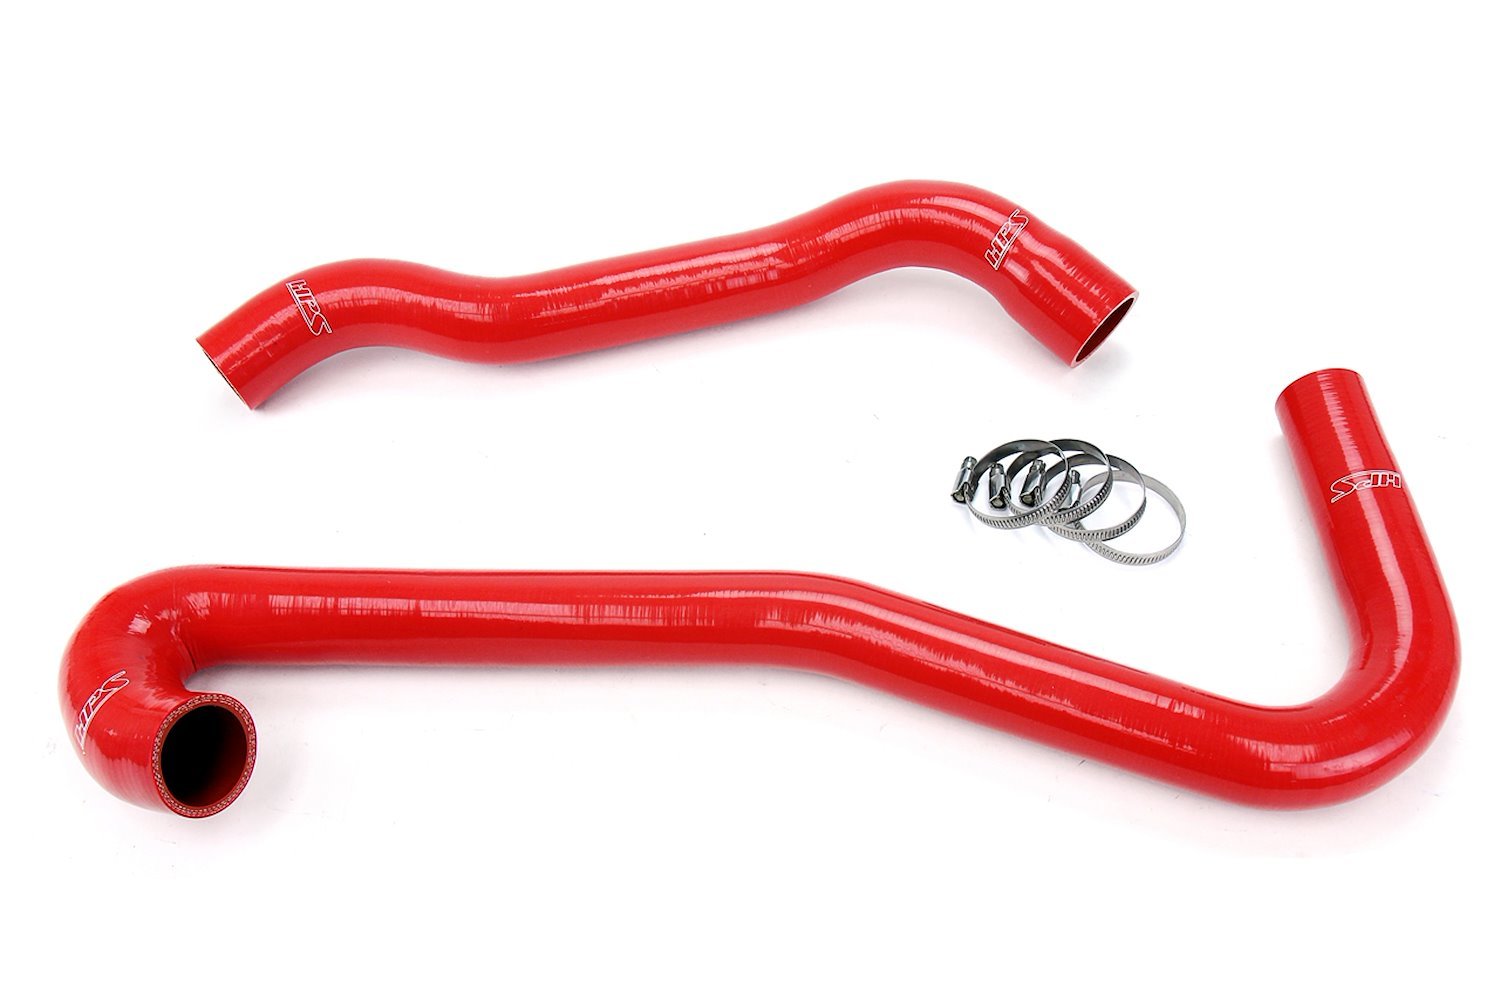 57-1453-RED Radiator Hose Kit, High-Temp 3-Ply Reinforced Silicone, Replace OEM Rubber Radiator Coolant Hoses